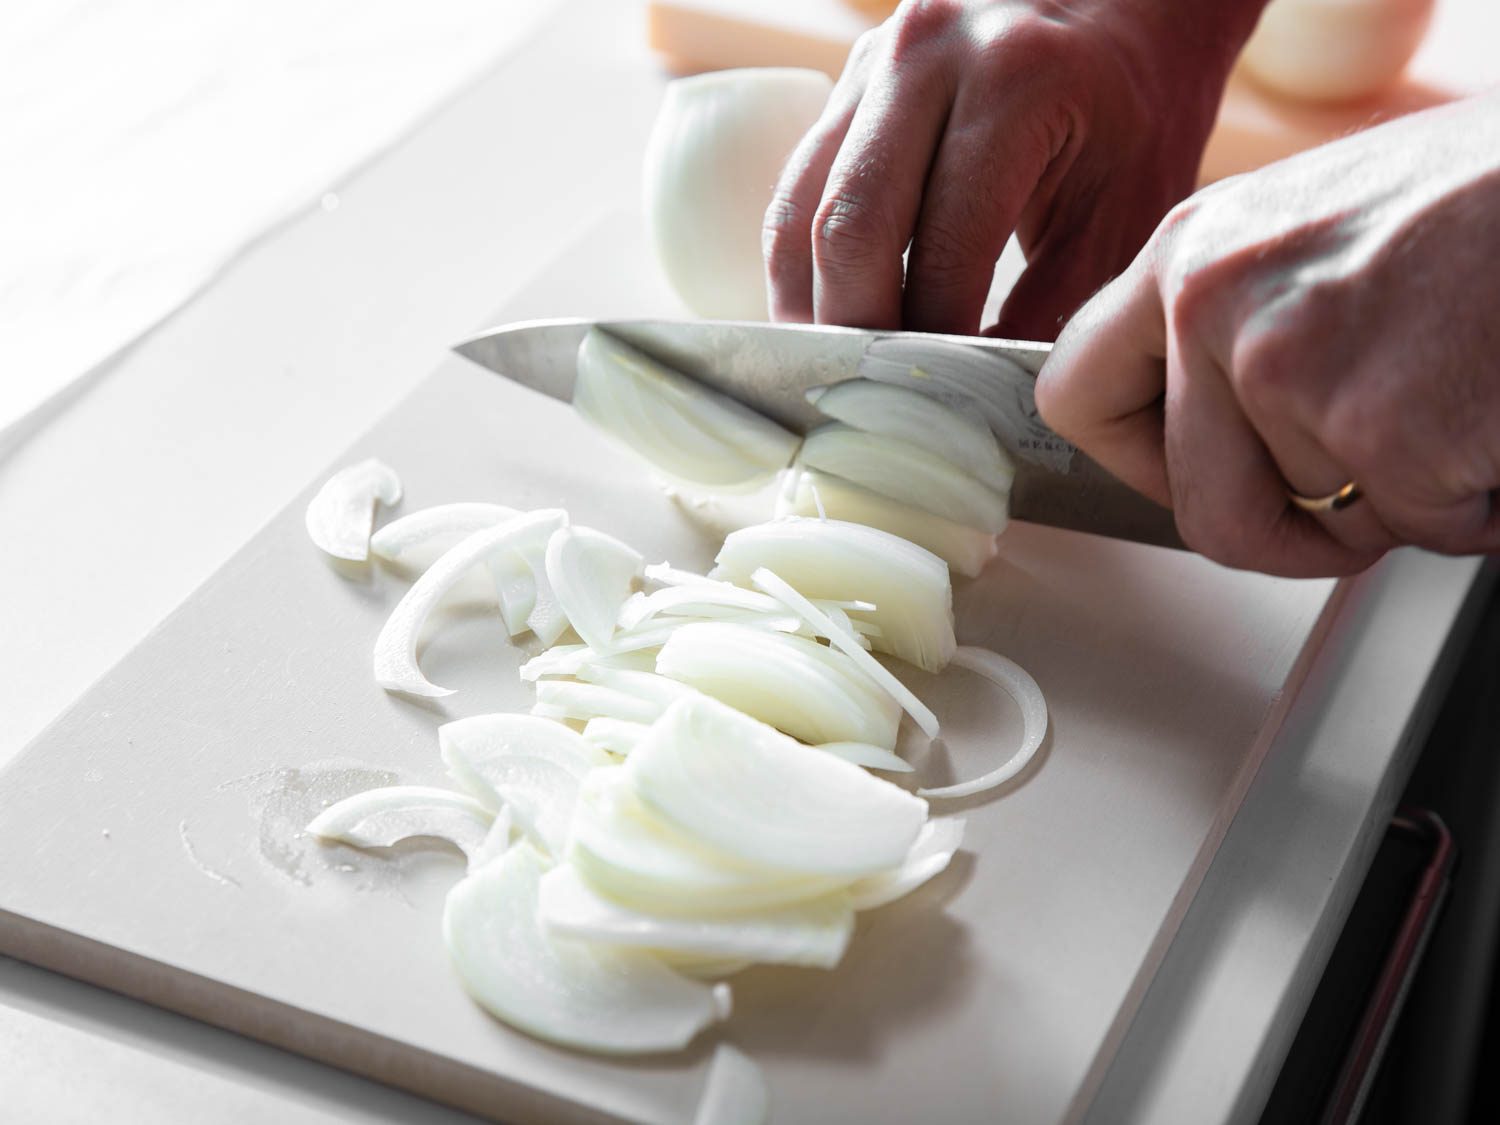 Slicing onions: one good way to test a cutting board's performance.